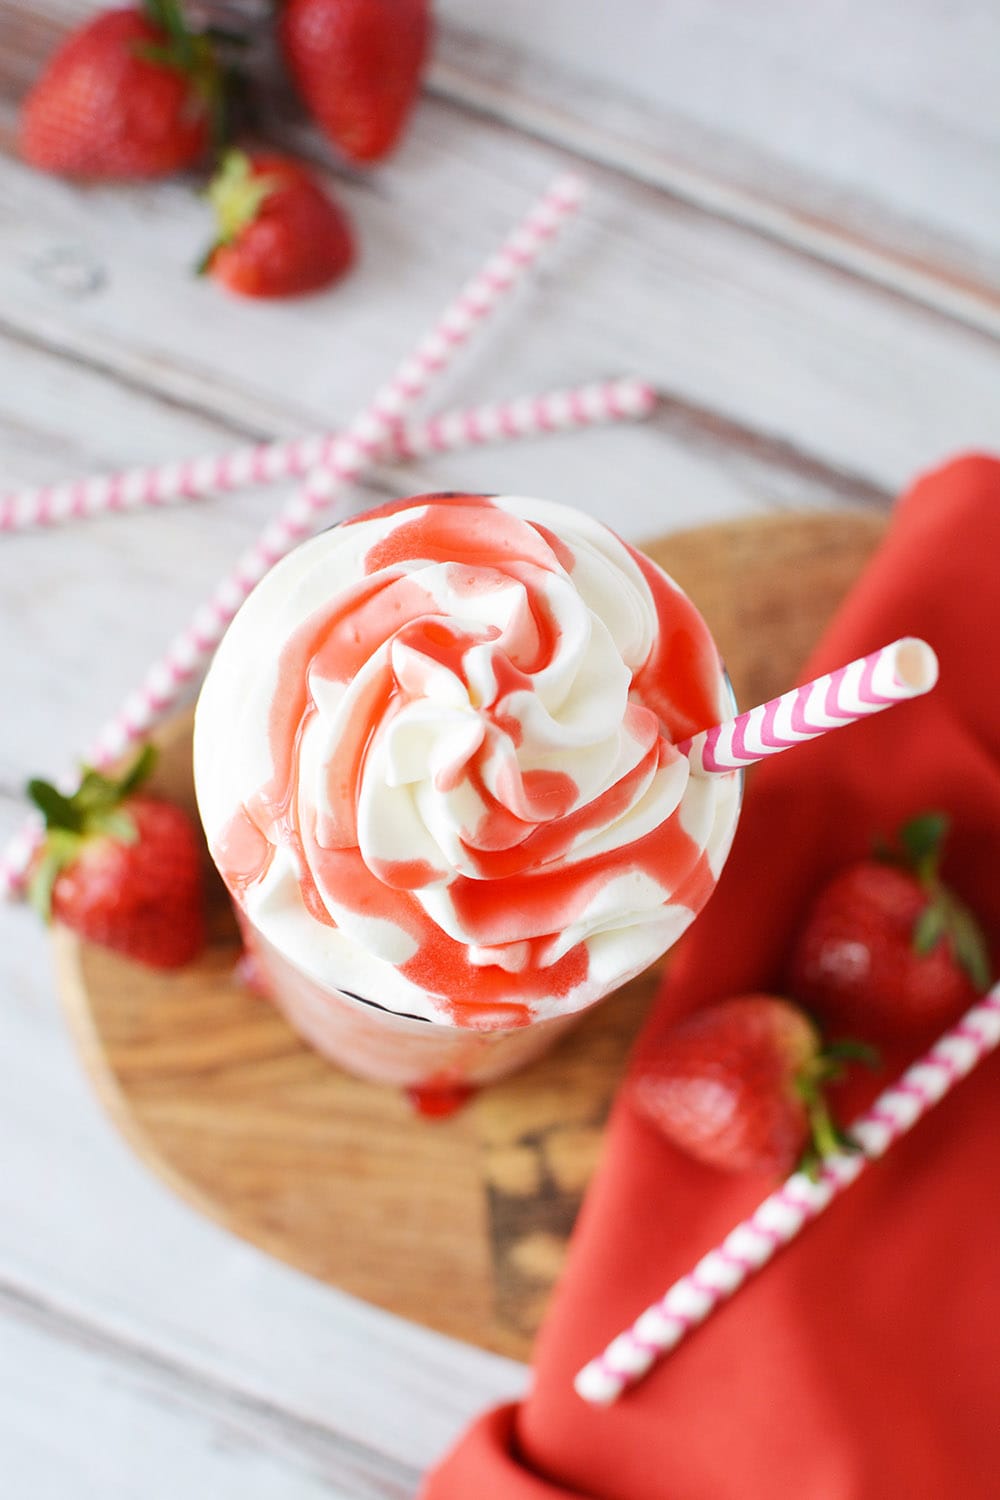 Overhead shot of strawberry syrup on top of whipped cream in a glass of a pink blended drink.